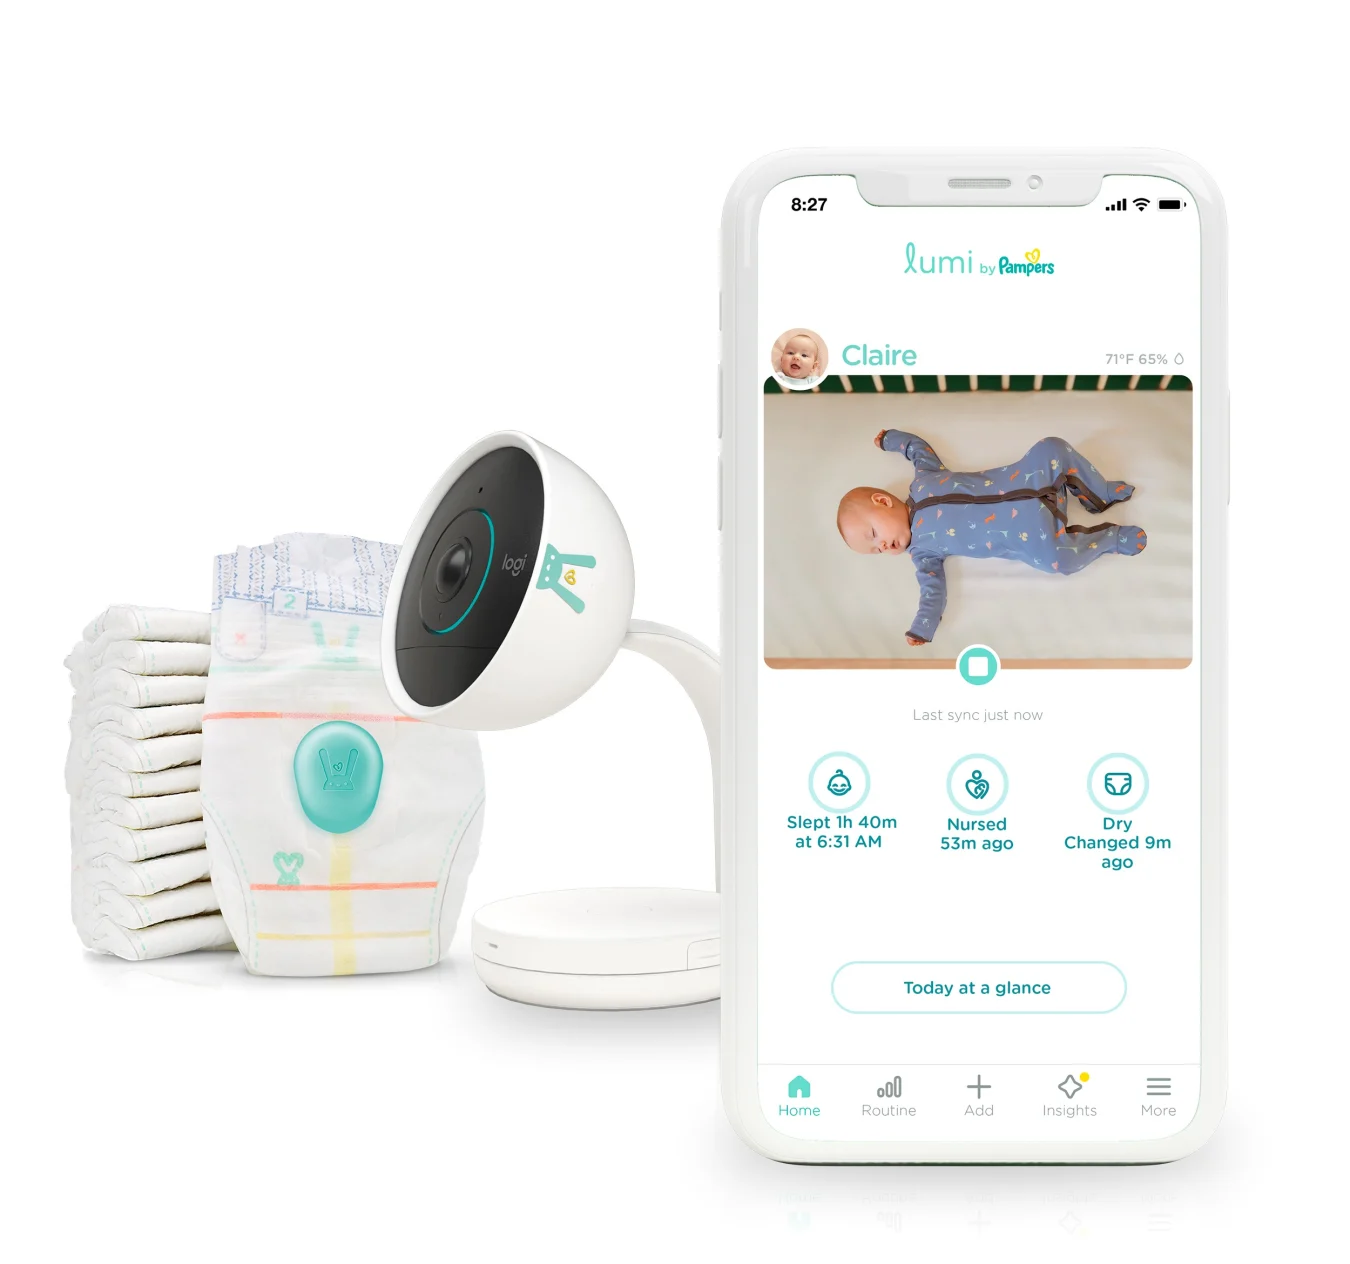 Pampers Lumi system